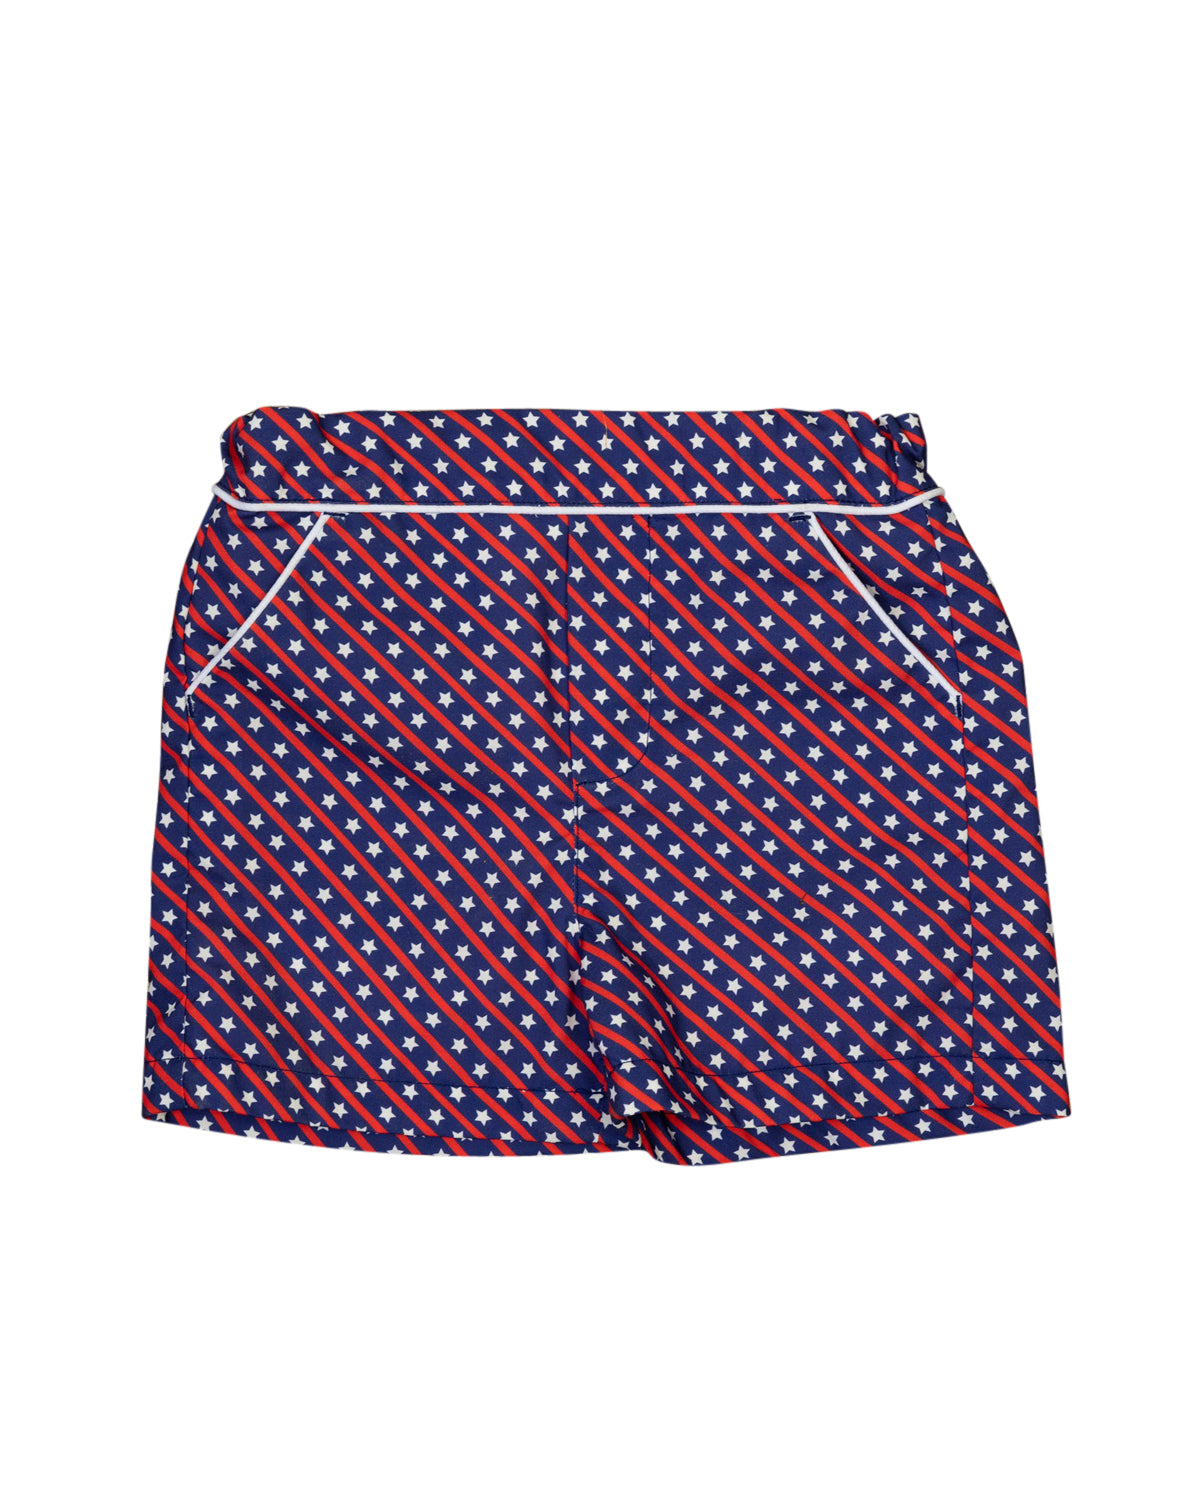 Stars and Stripes Shorts-FINAL SALE